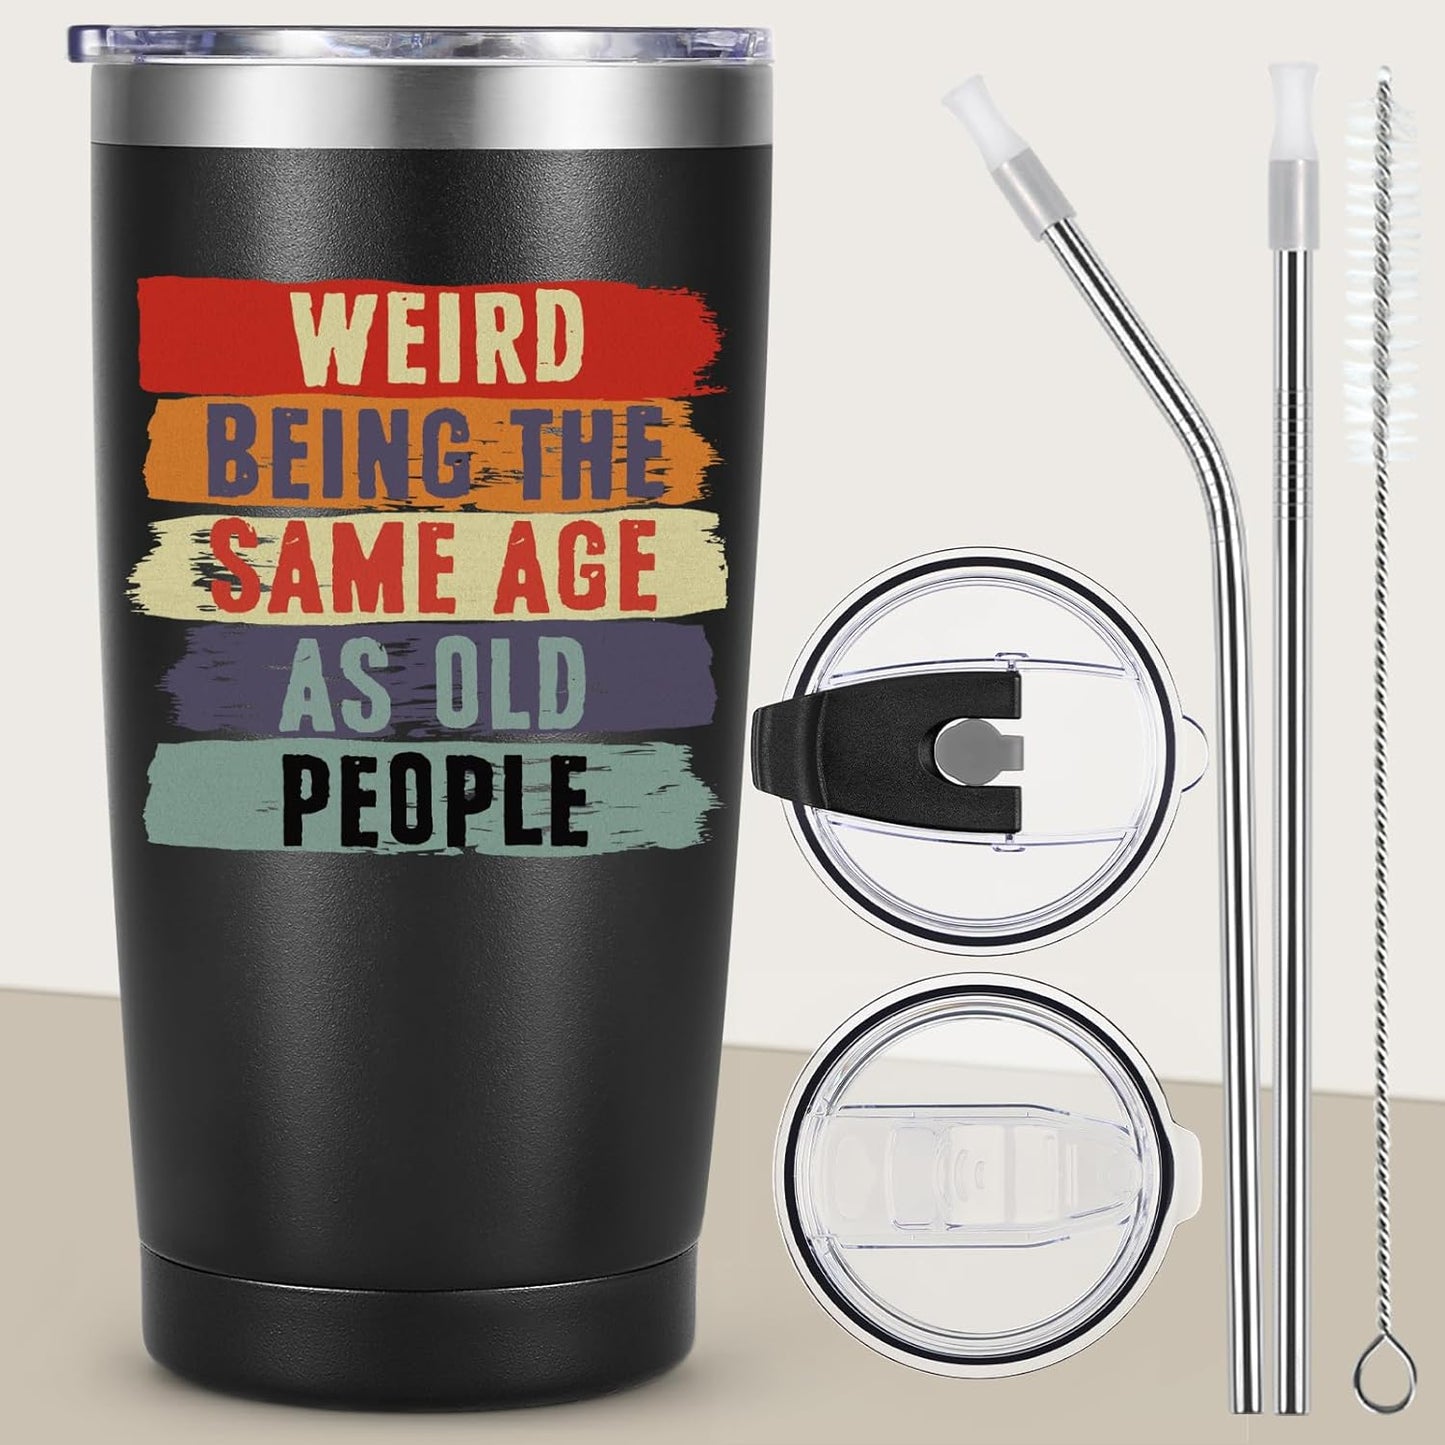 Funny Birthday Gifts for Men, Unique Gag Birthday Gifts Ideas for 40th 50th 60th 70th 80th, Cool Weird Old People 20oz Tumbler for Dad Husband Friend Grandpa Him Valentines Day